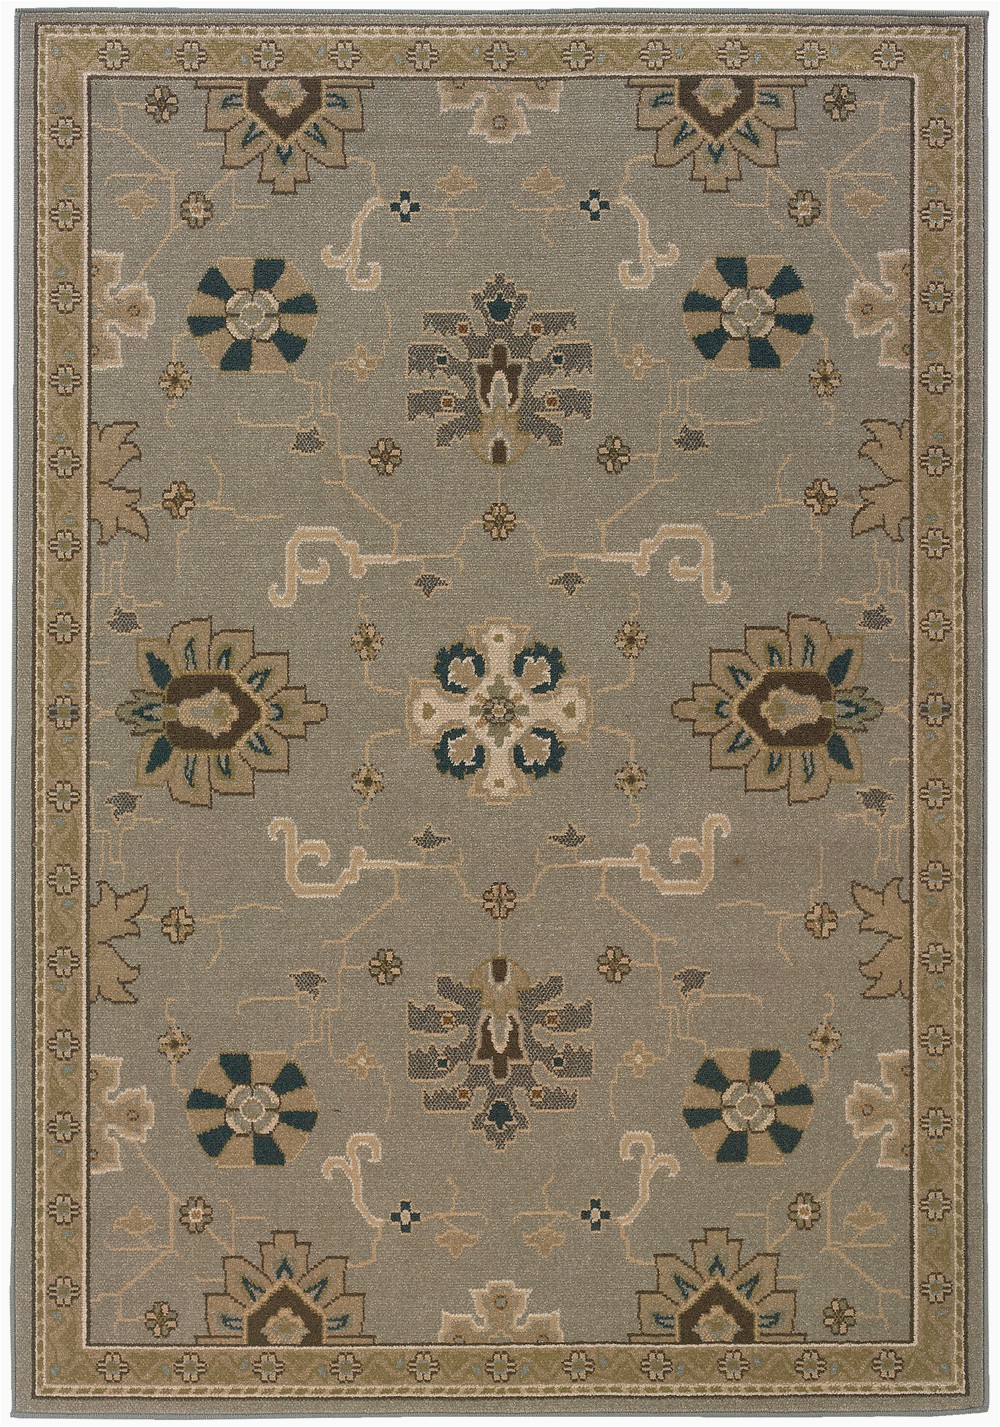 Area Rugs at Walmart Com Moretti Paisan area Rugs 3965a Bordered Modern Persian Floral Rug Walmart